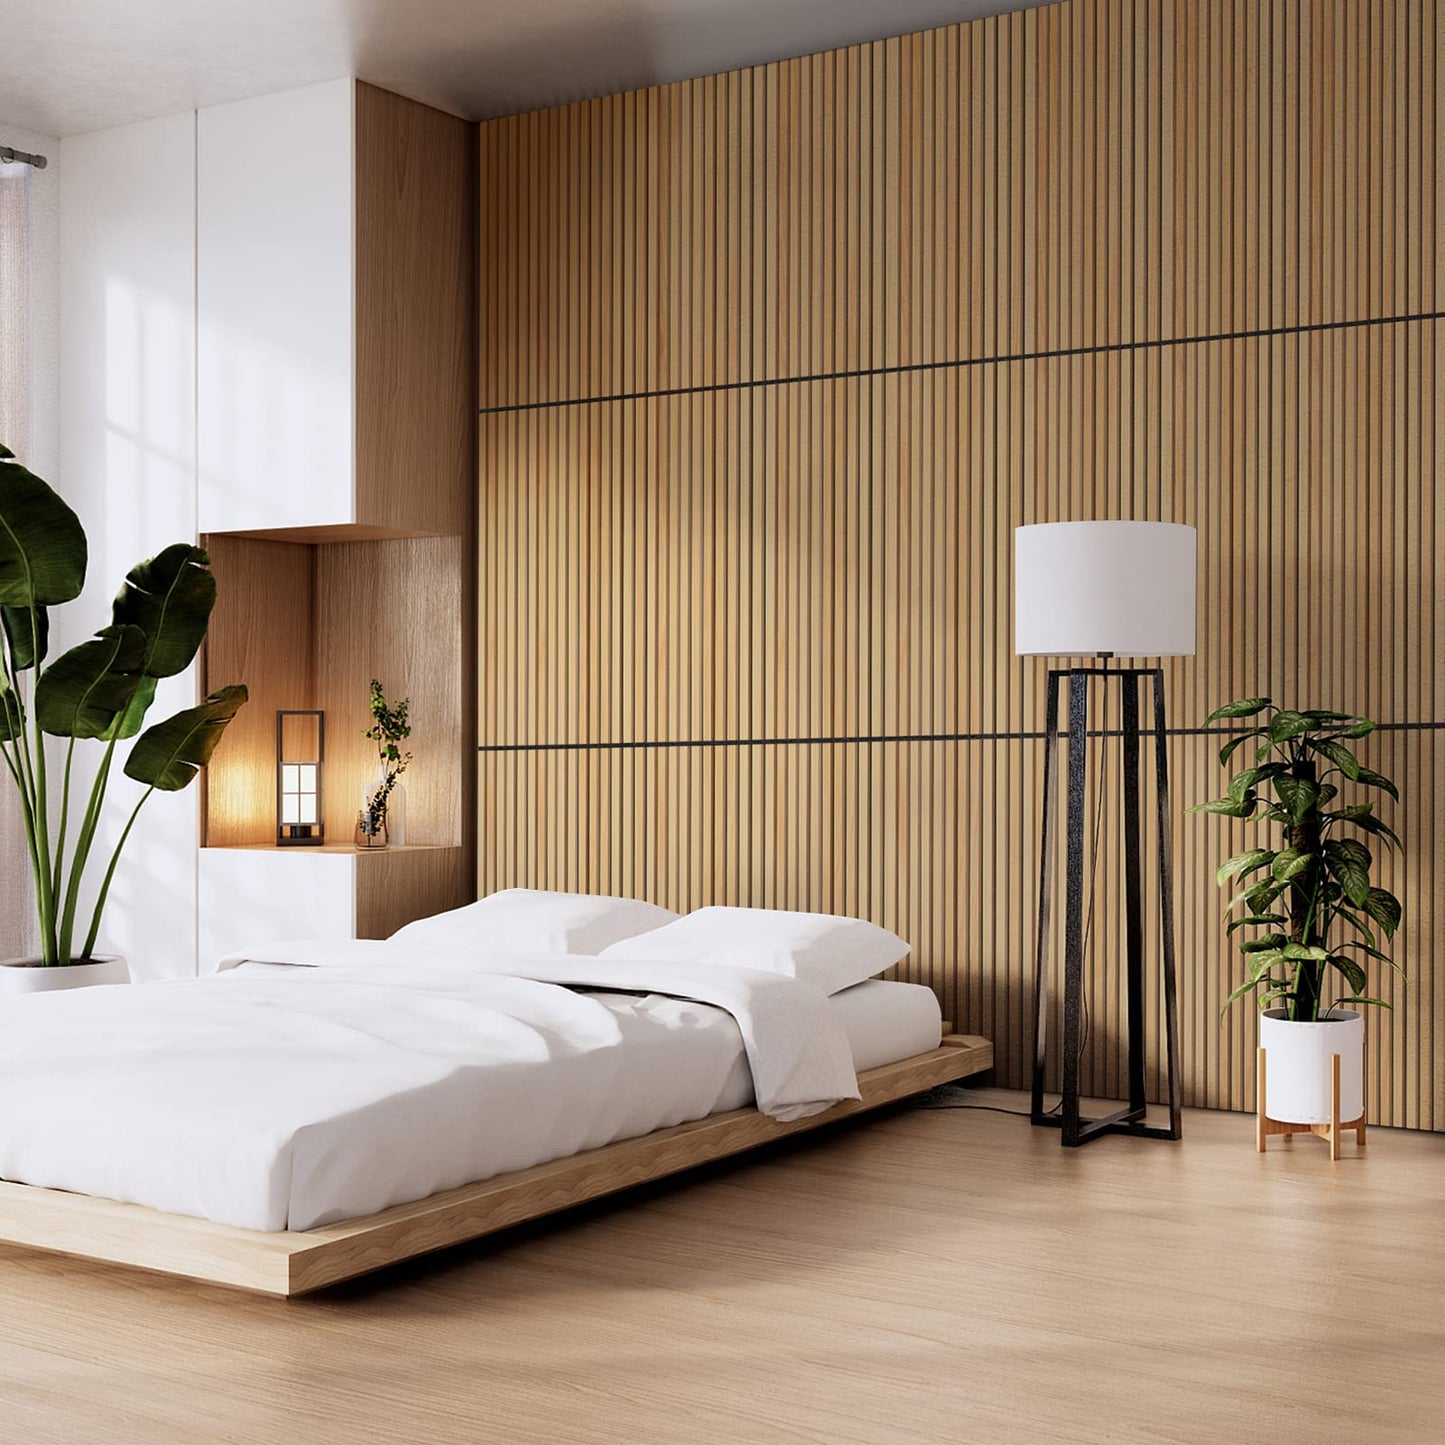 Acoustic Wood Slat Wall Panels for Interior Wall Decor | Soundproof Wall Panels | 3D Slat Wood Panels | Bedroom Sound Absorption Decor | Seamless